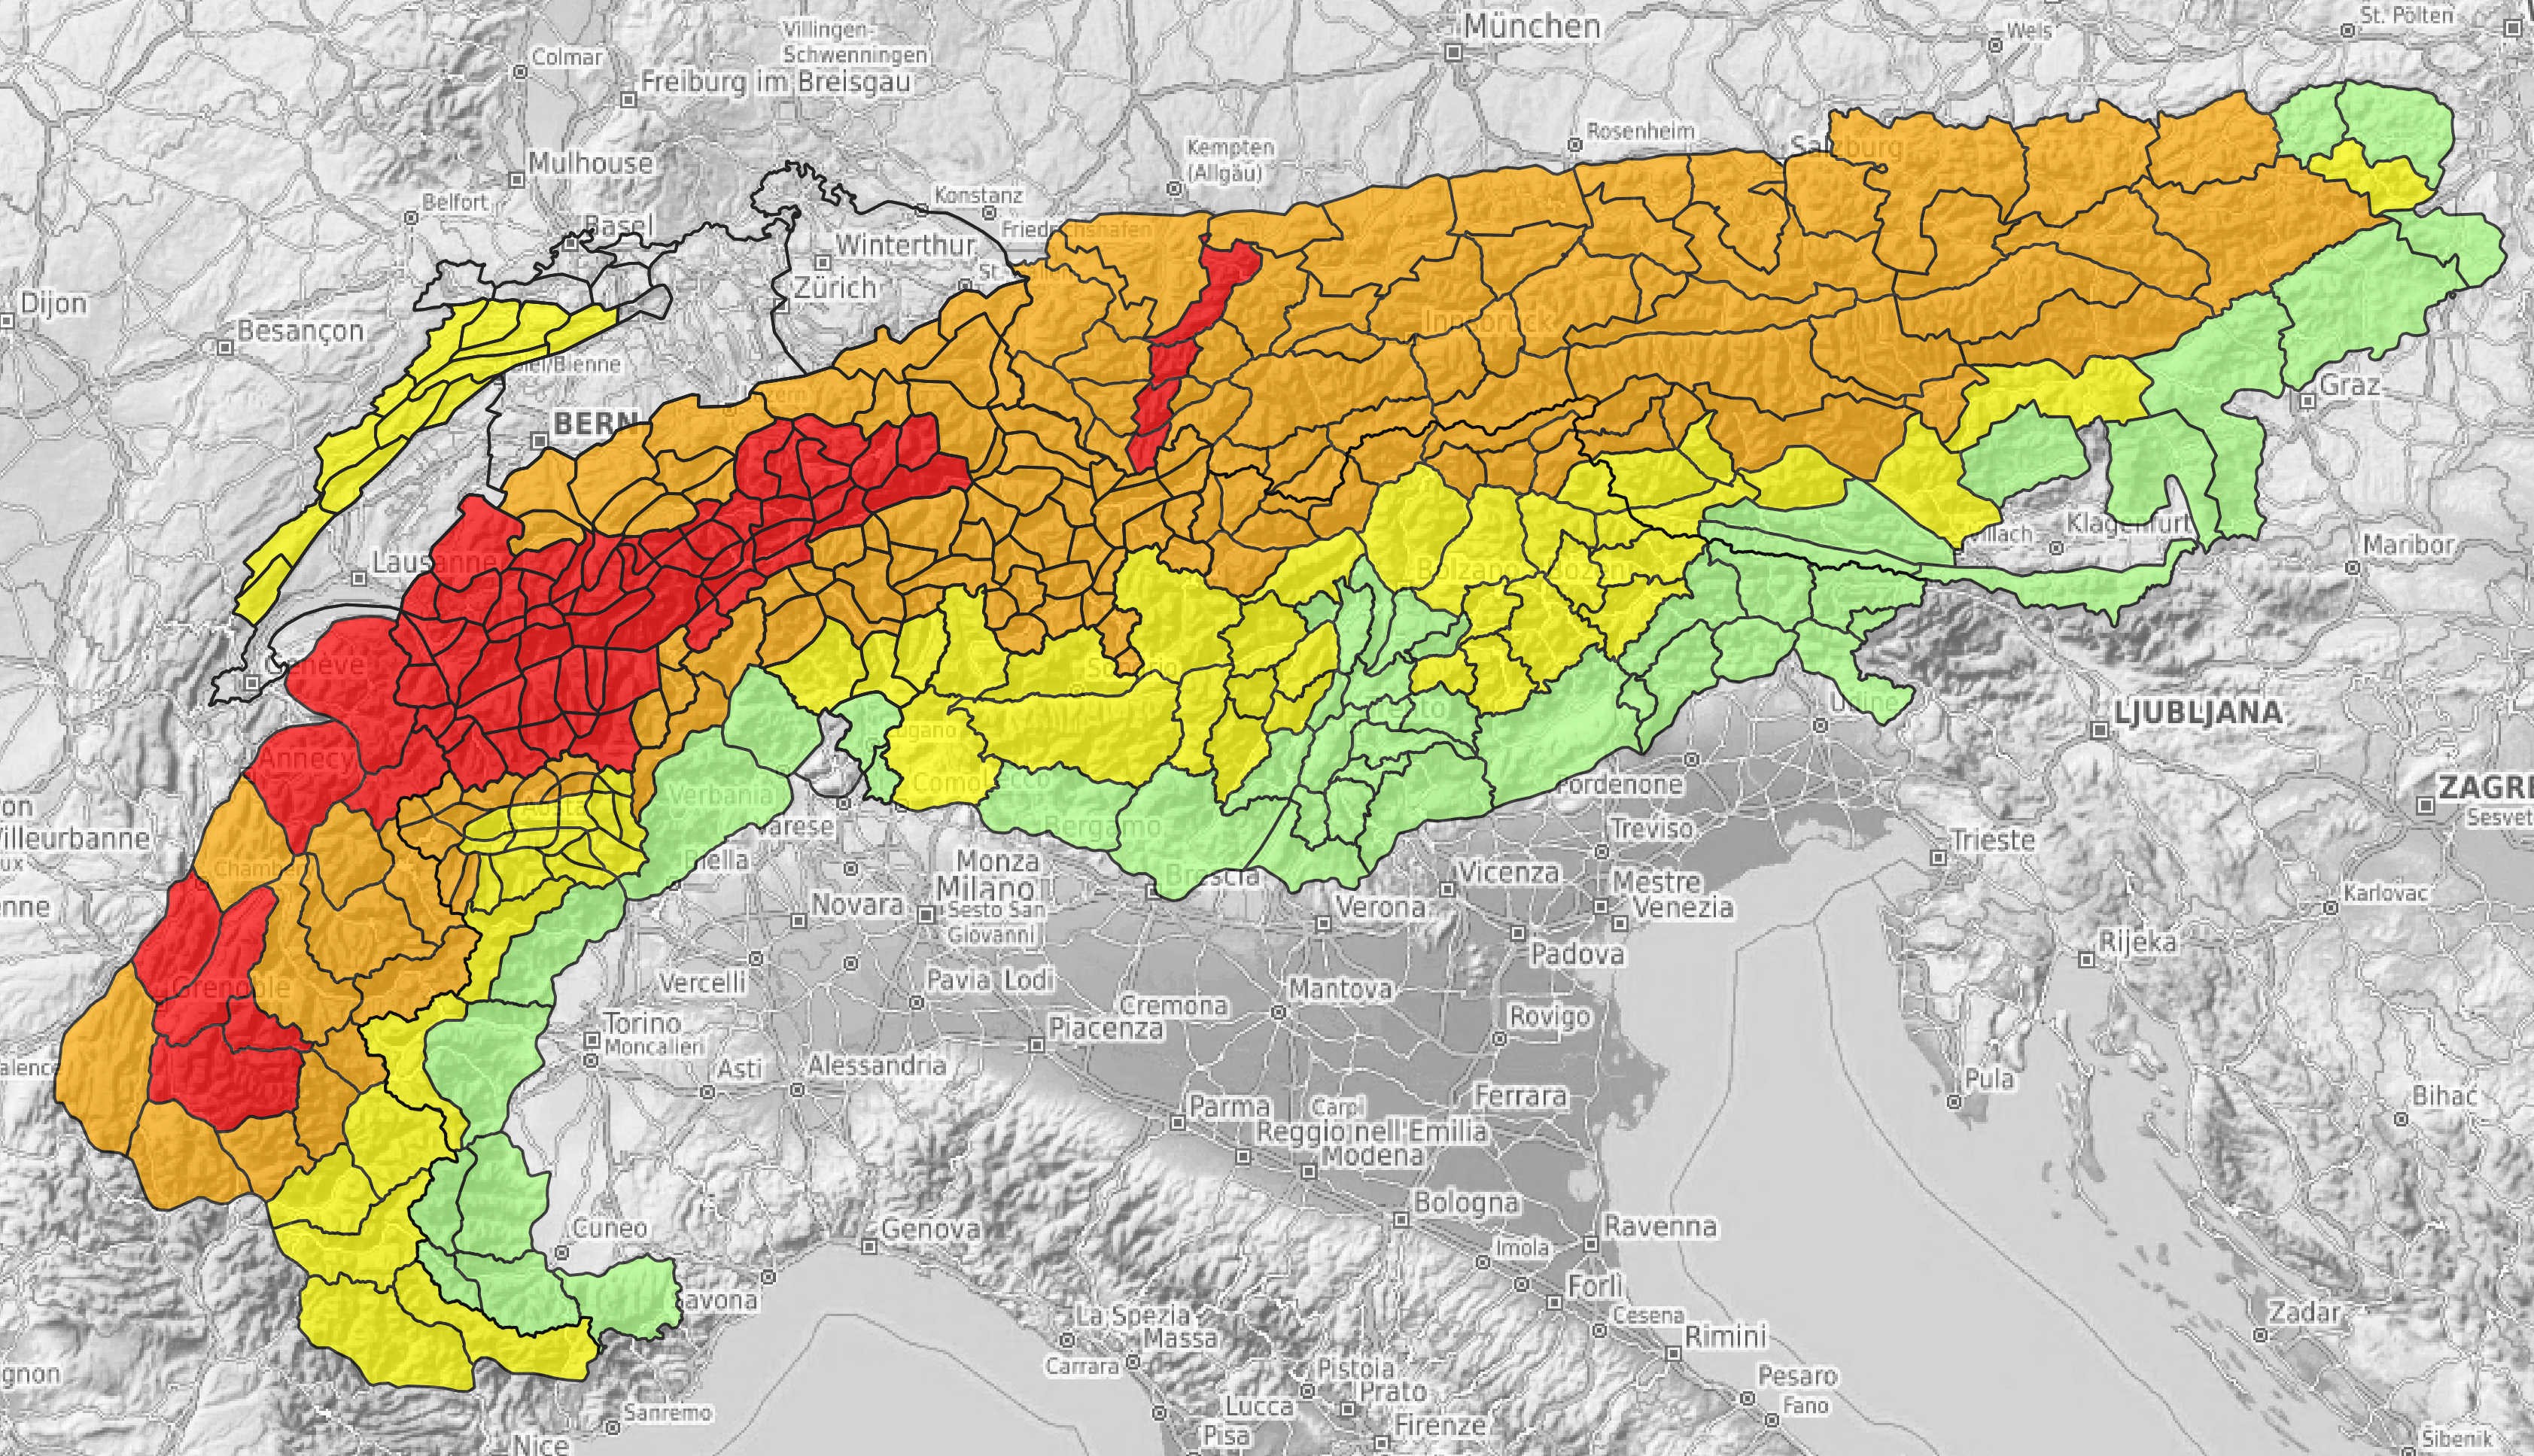 Initiative for a uniform avalanche forecast throughout the Alps